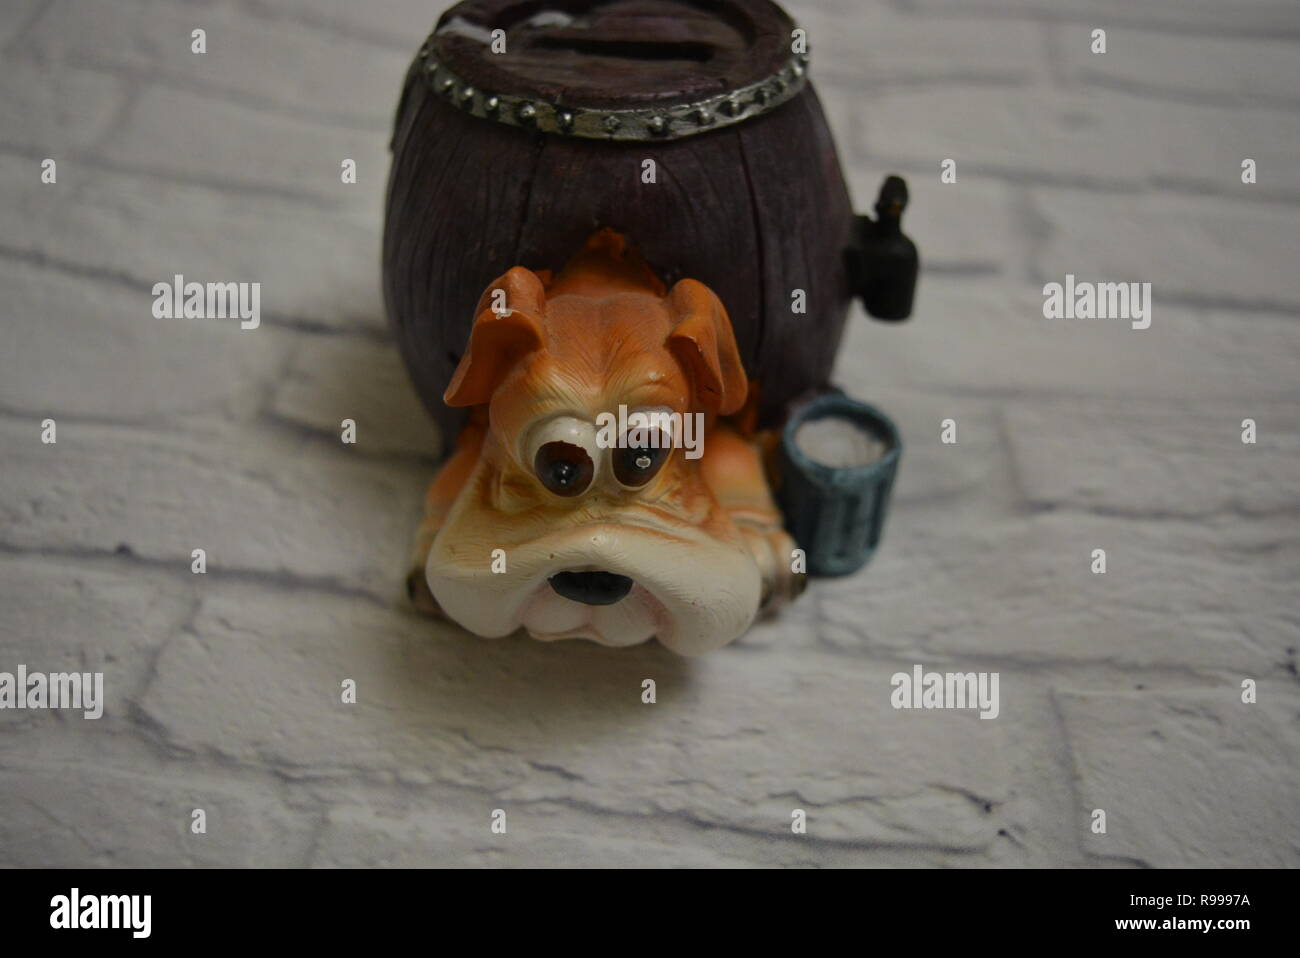 Ceramic drip tray in the form of a beer barrel with a dog head and a blue glass of beer next to it against the background of a white brick wall. Stock Photo